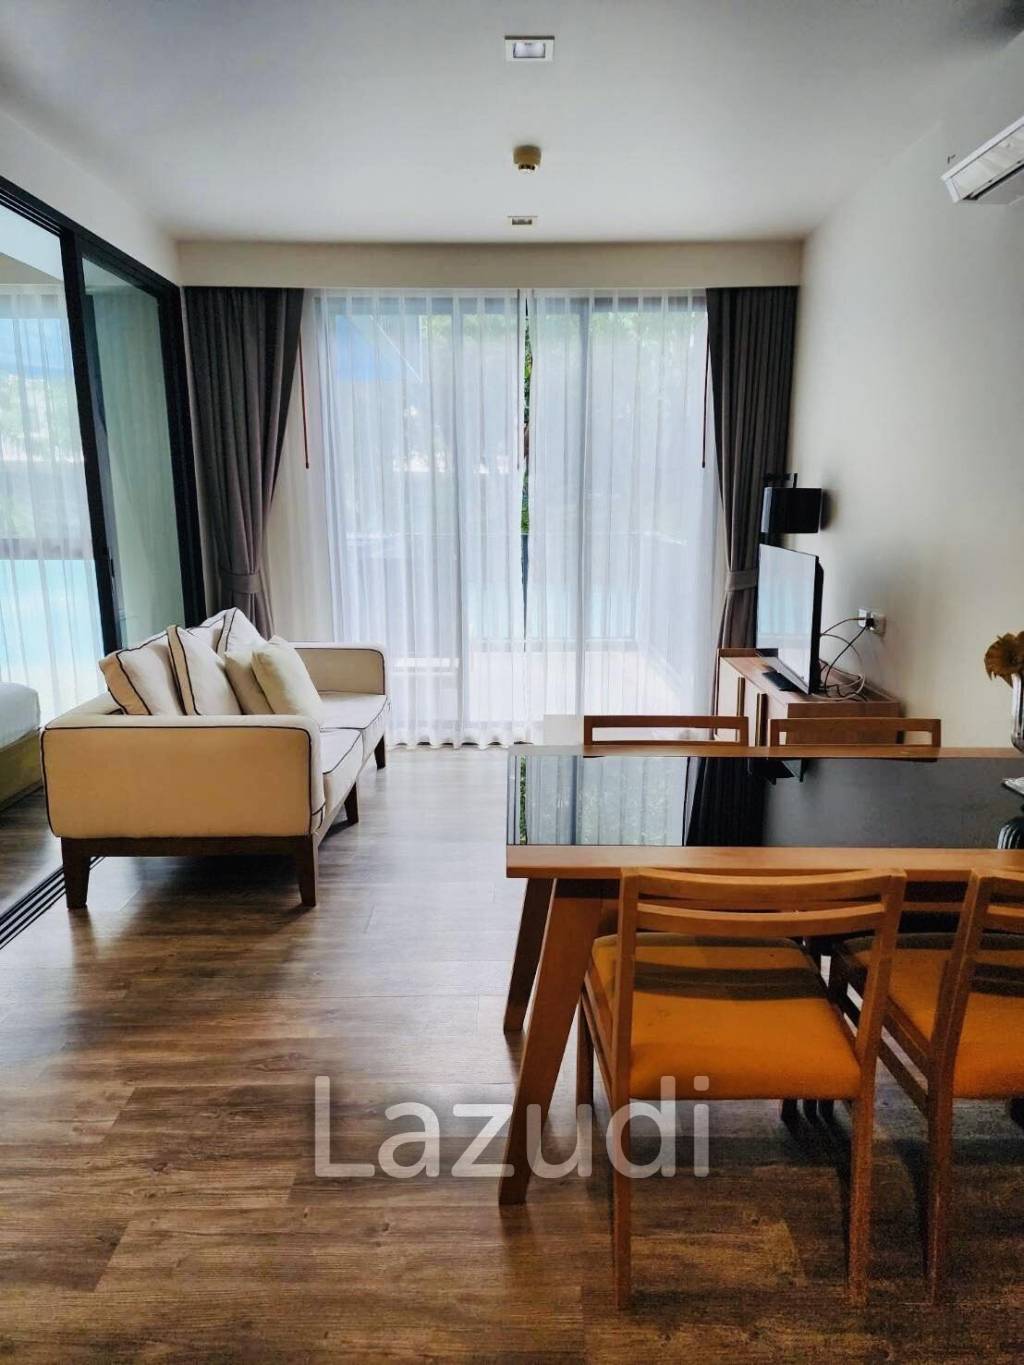 Pool Access 2 Bedroom 67.3 SQ.M. The Deck Condo Patong For Rent